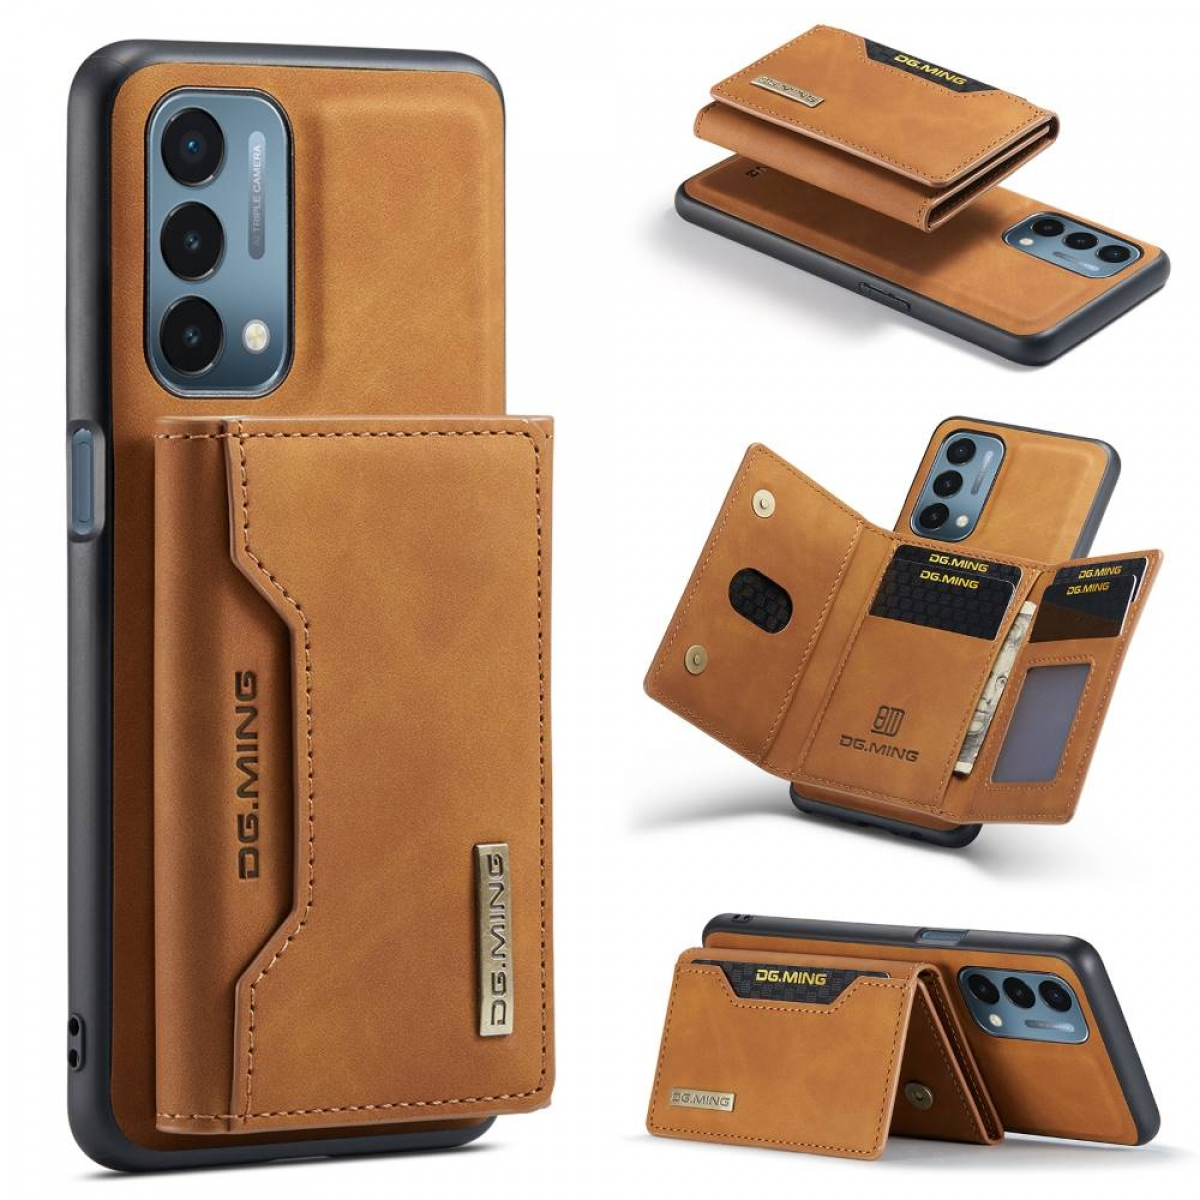 DG MING M2 2in1, N200 Backcover, Nord OnePlus, 5G, Braun